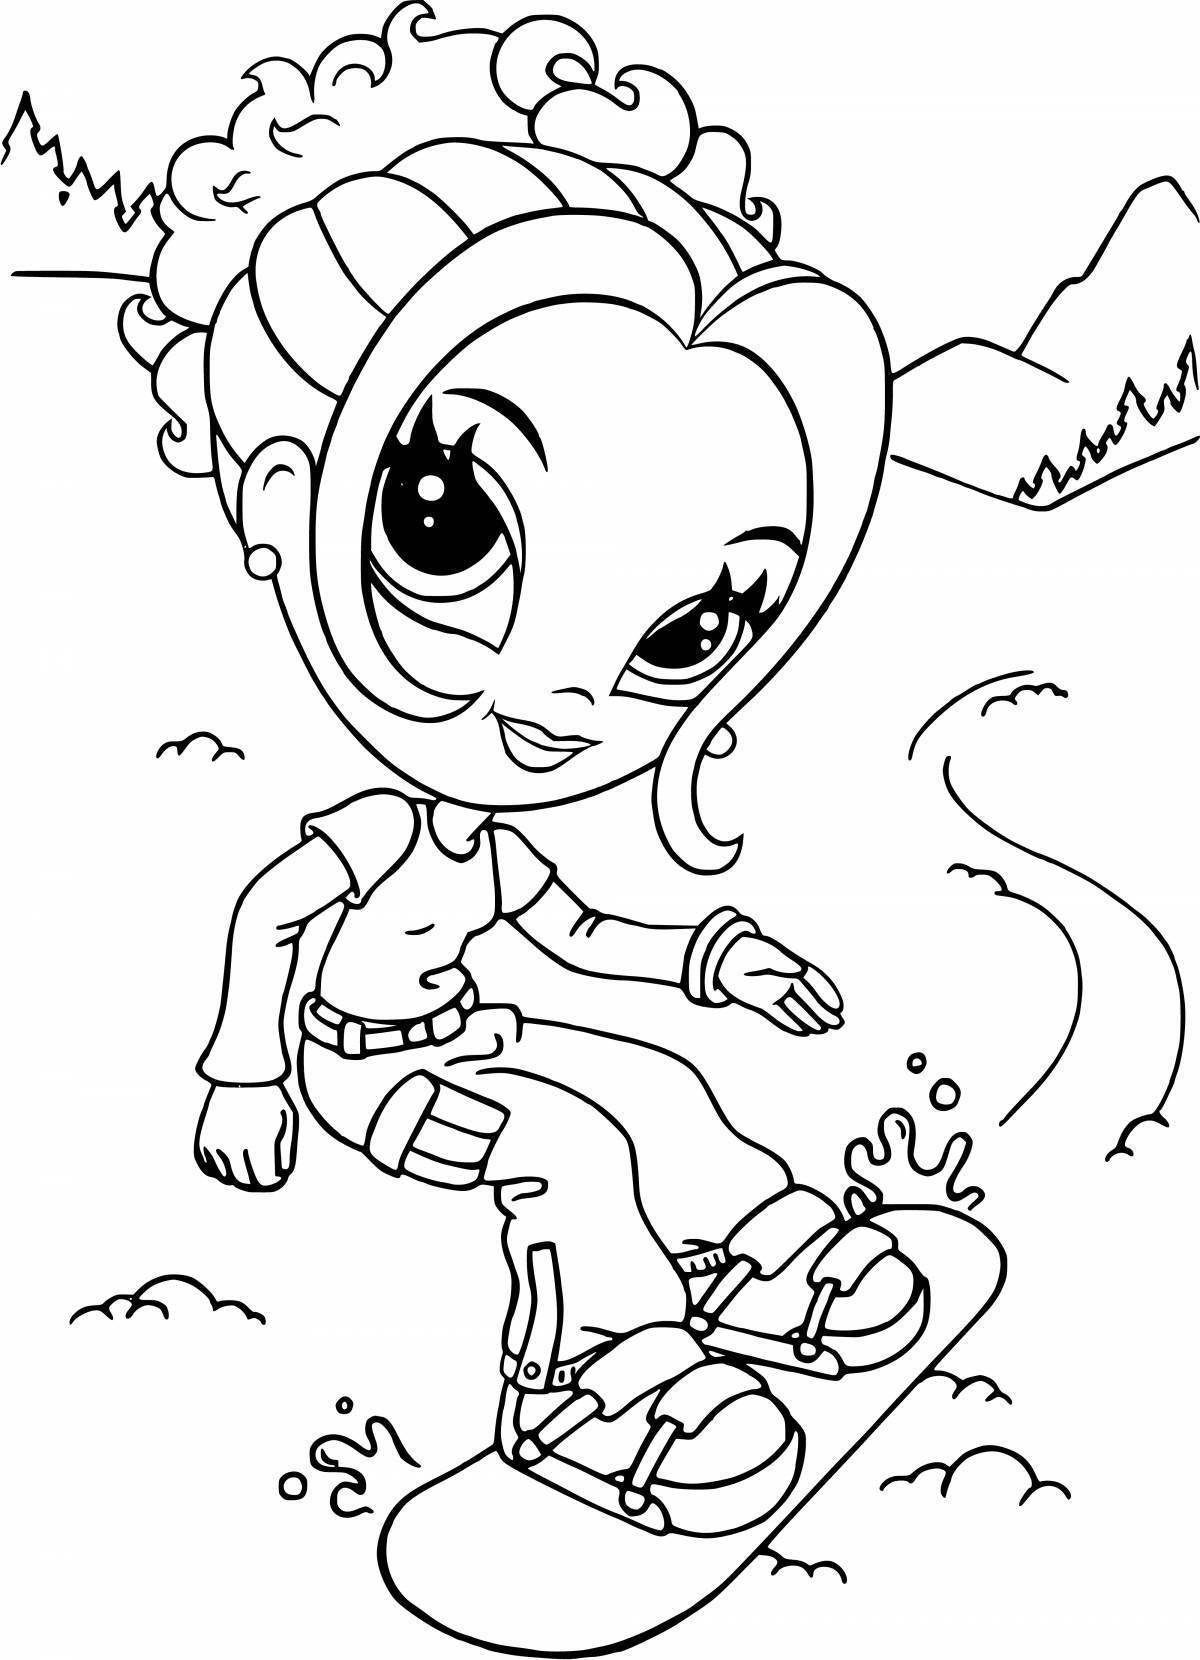 Coloring book magical paint